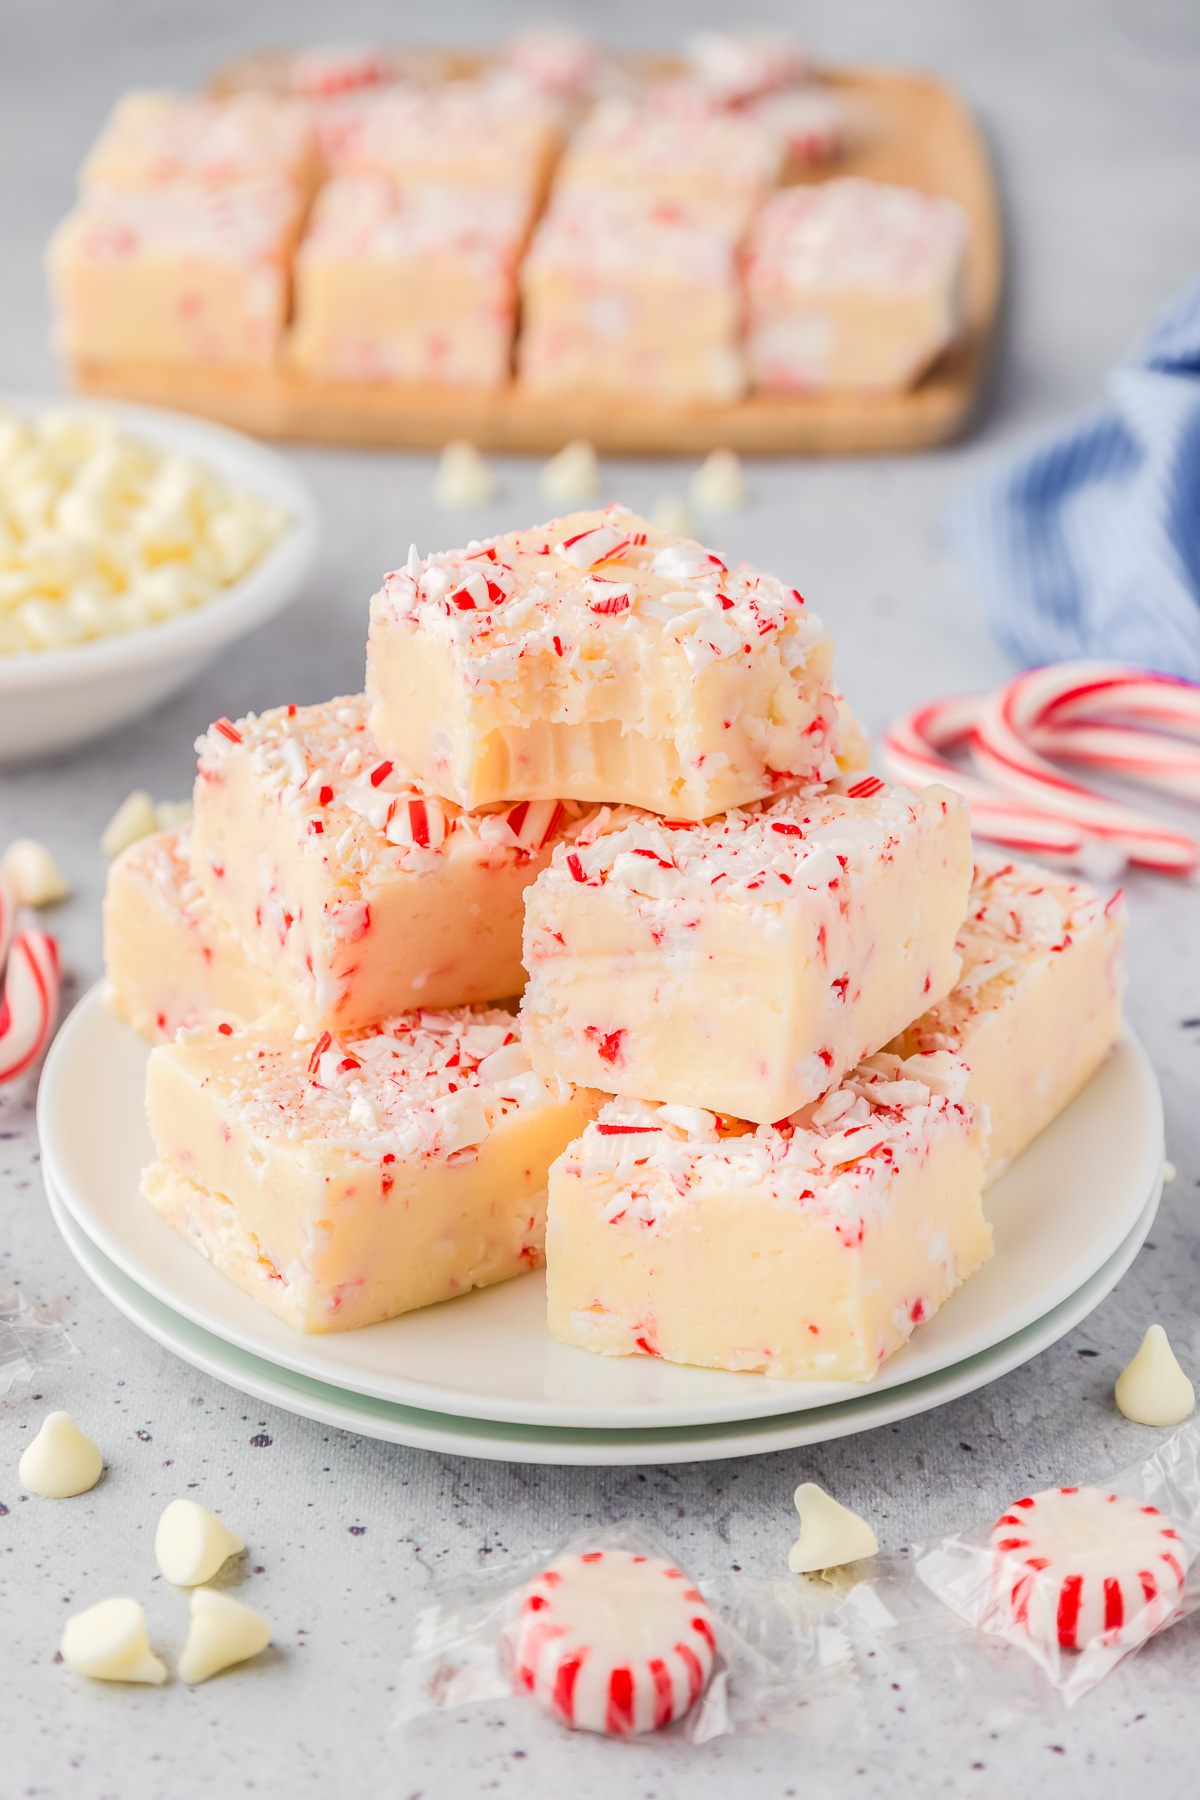 Peppermint fudge topped with candy cane pieces piled on a plate with the top piece missing a bite and more candy cane fudge, candy canes, peppermint pieces and white chocolate chips on the counter.